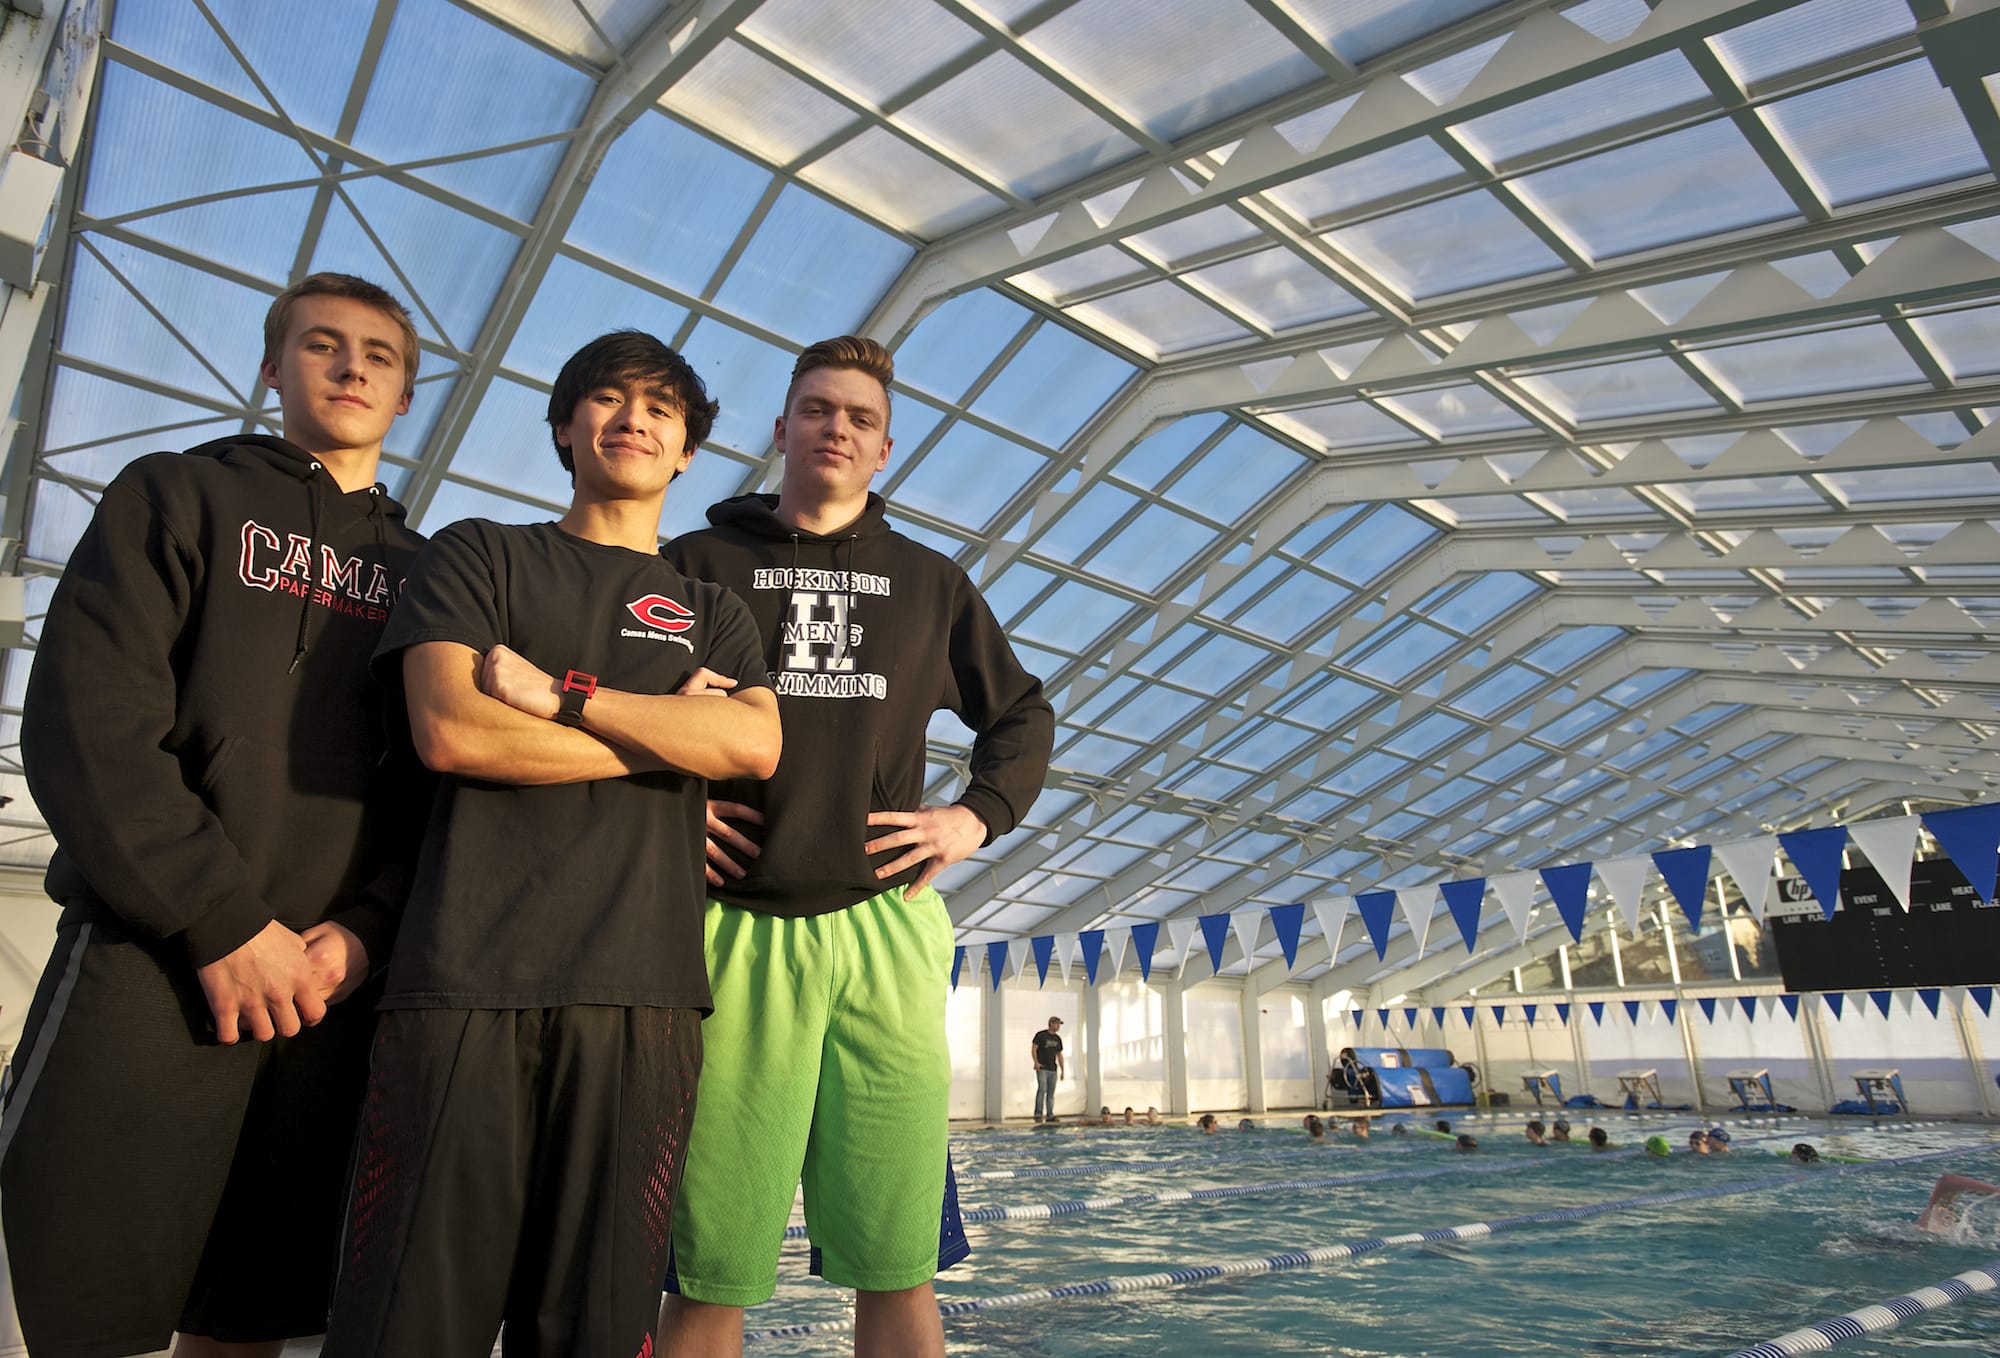 From left, Camas High School swimmers Lucas Ulmer and John Utas, and Hockinson's Dylan Osborne at LaCamas Swim and Sports Club.